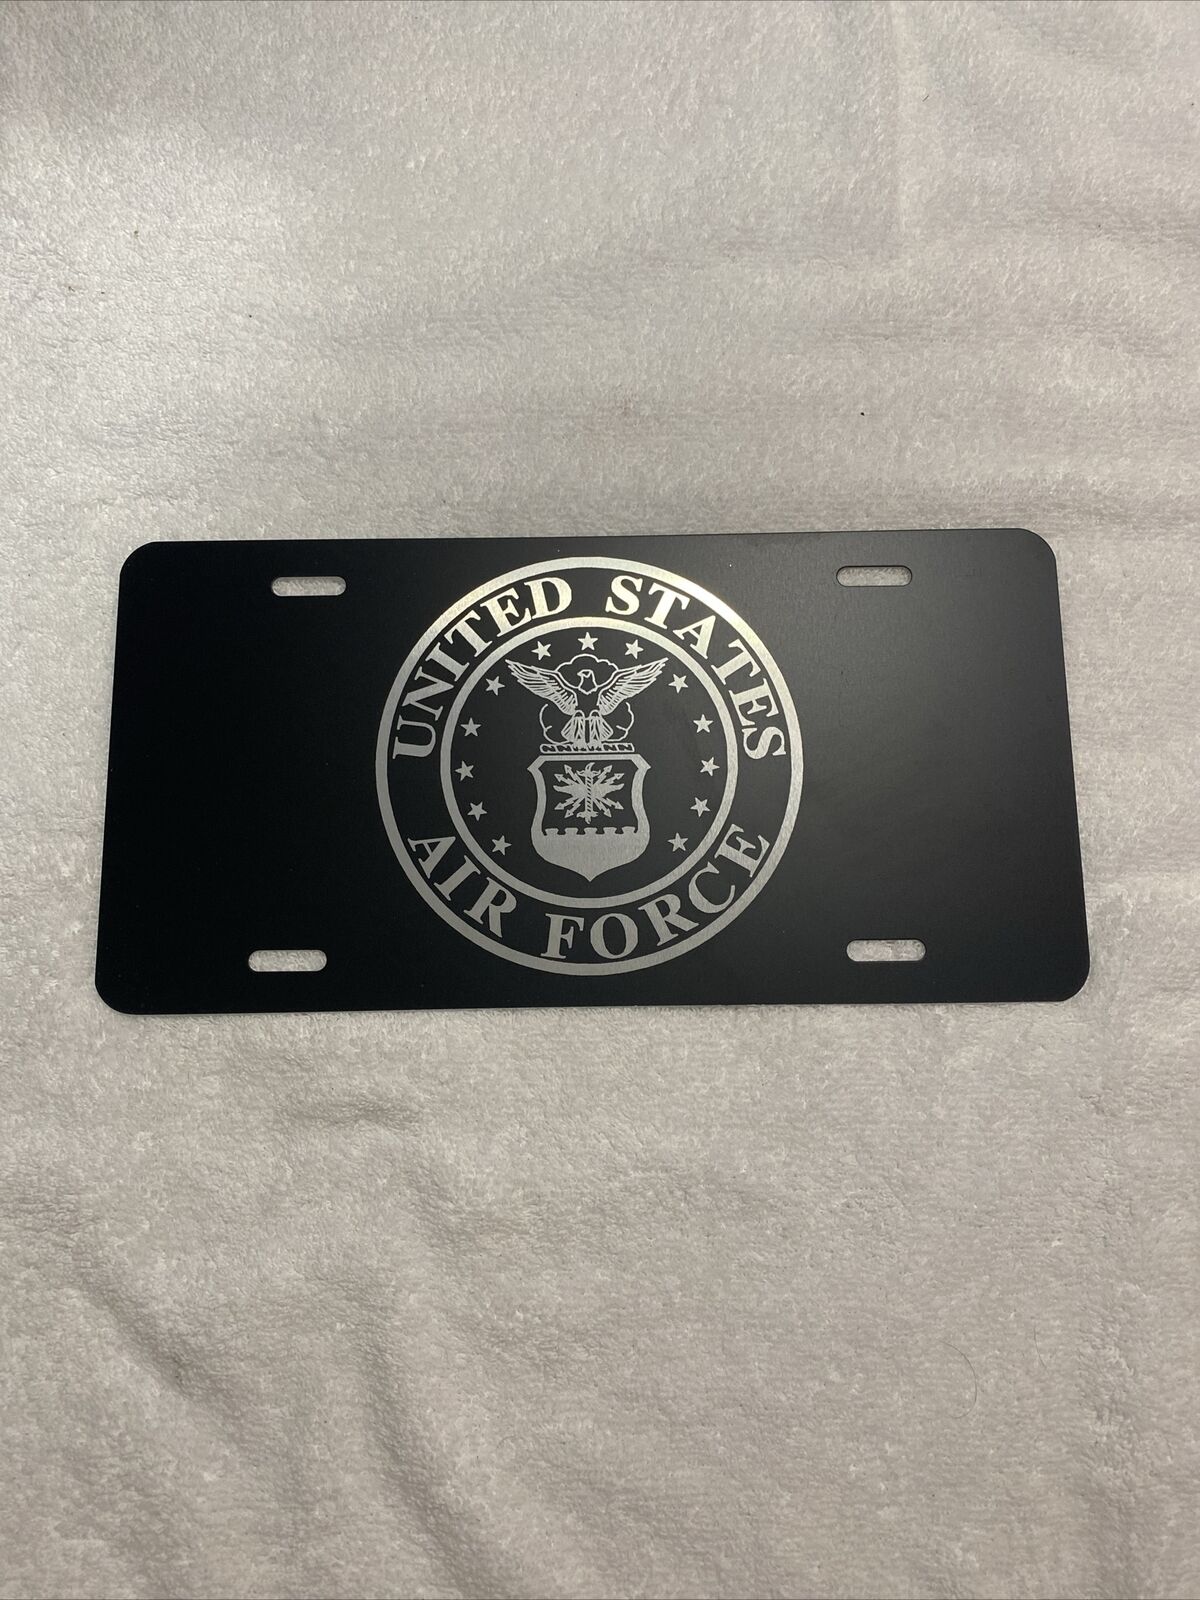 United States Air Force License Plate Tag Black And Silver